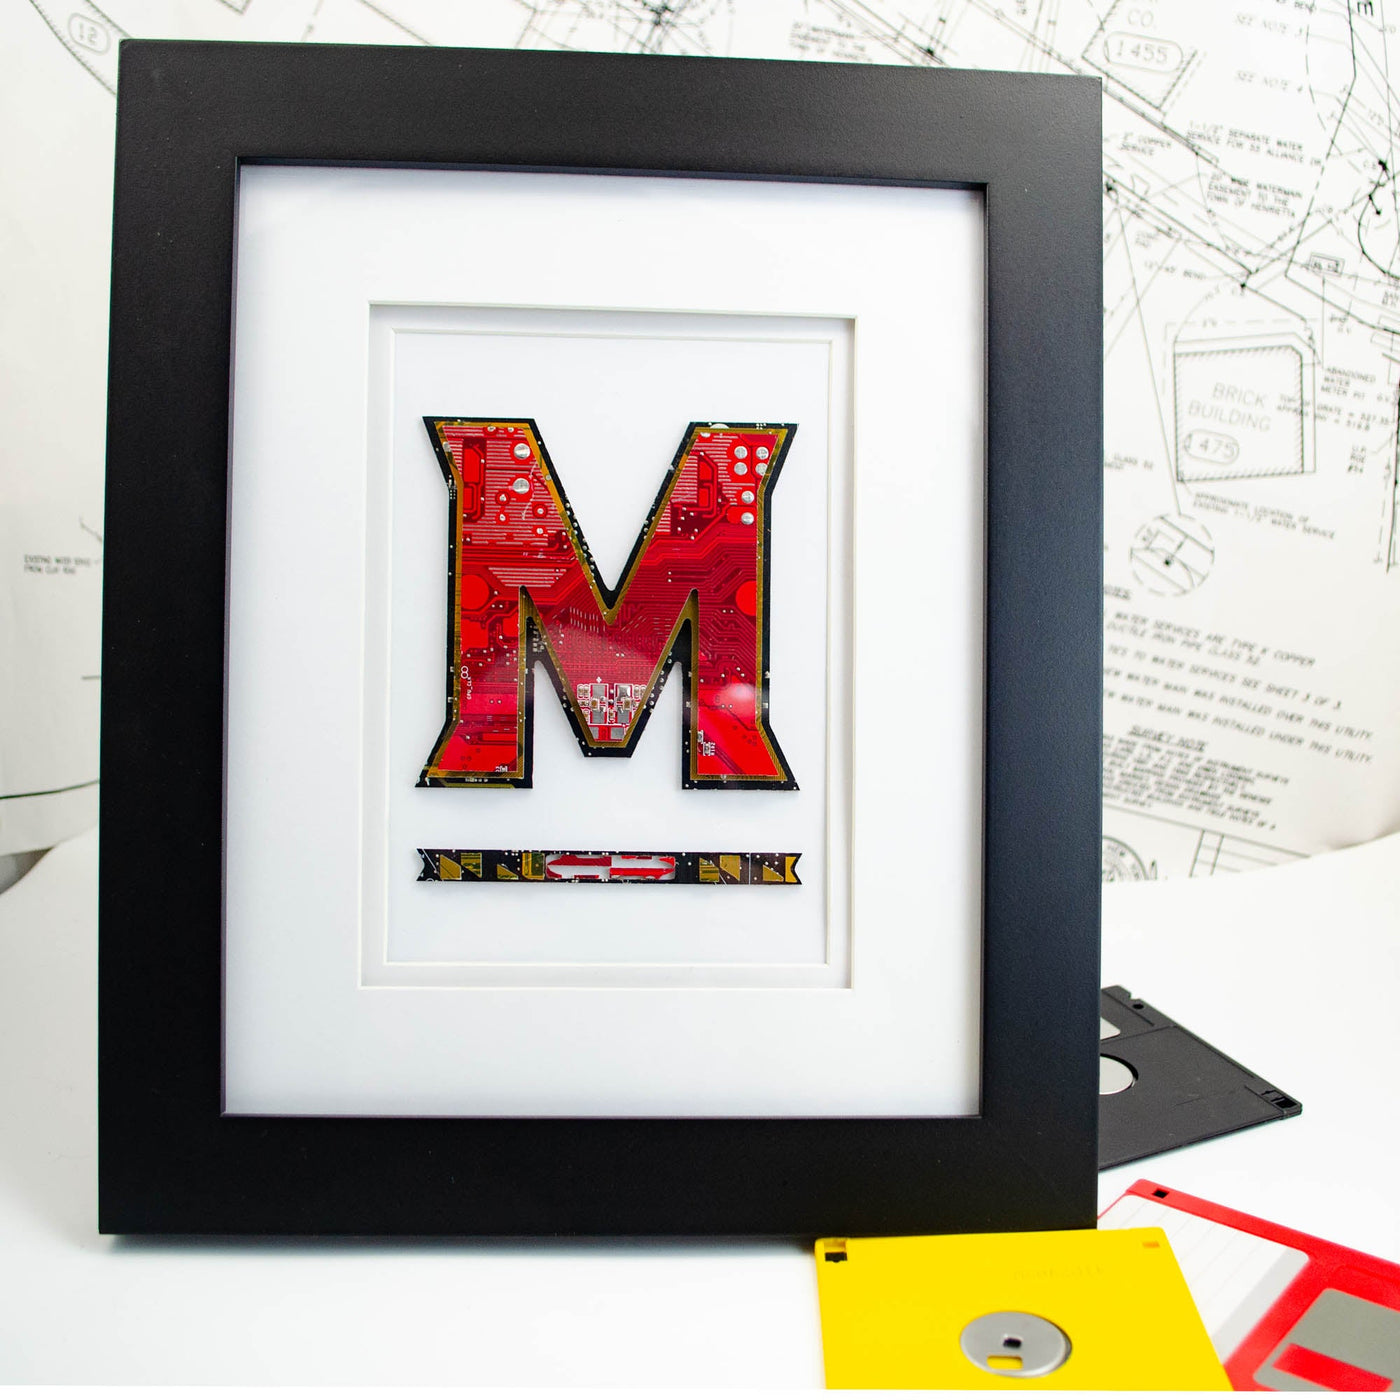 Custom Maryland Terrapins framed art made from upcycled circuit boards